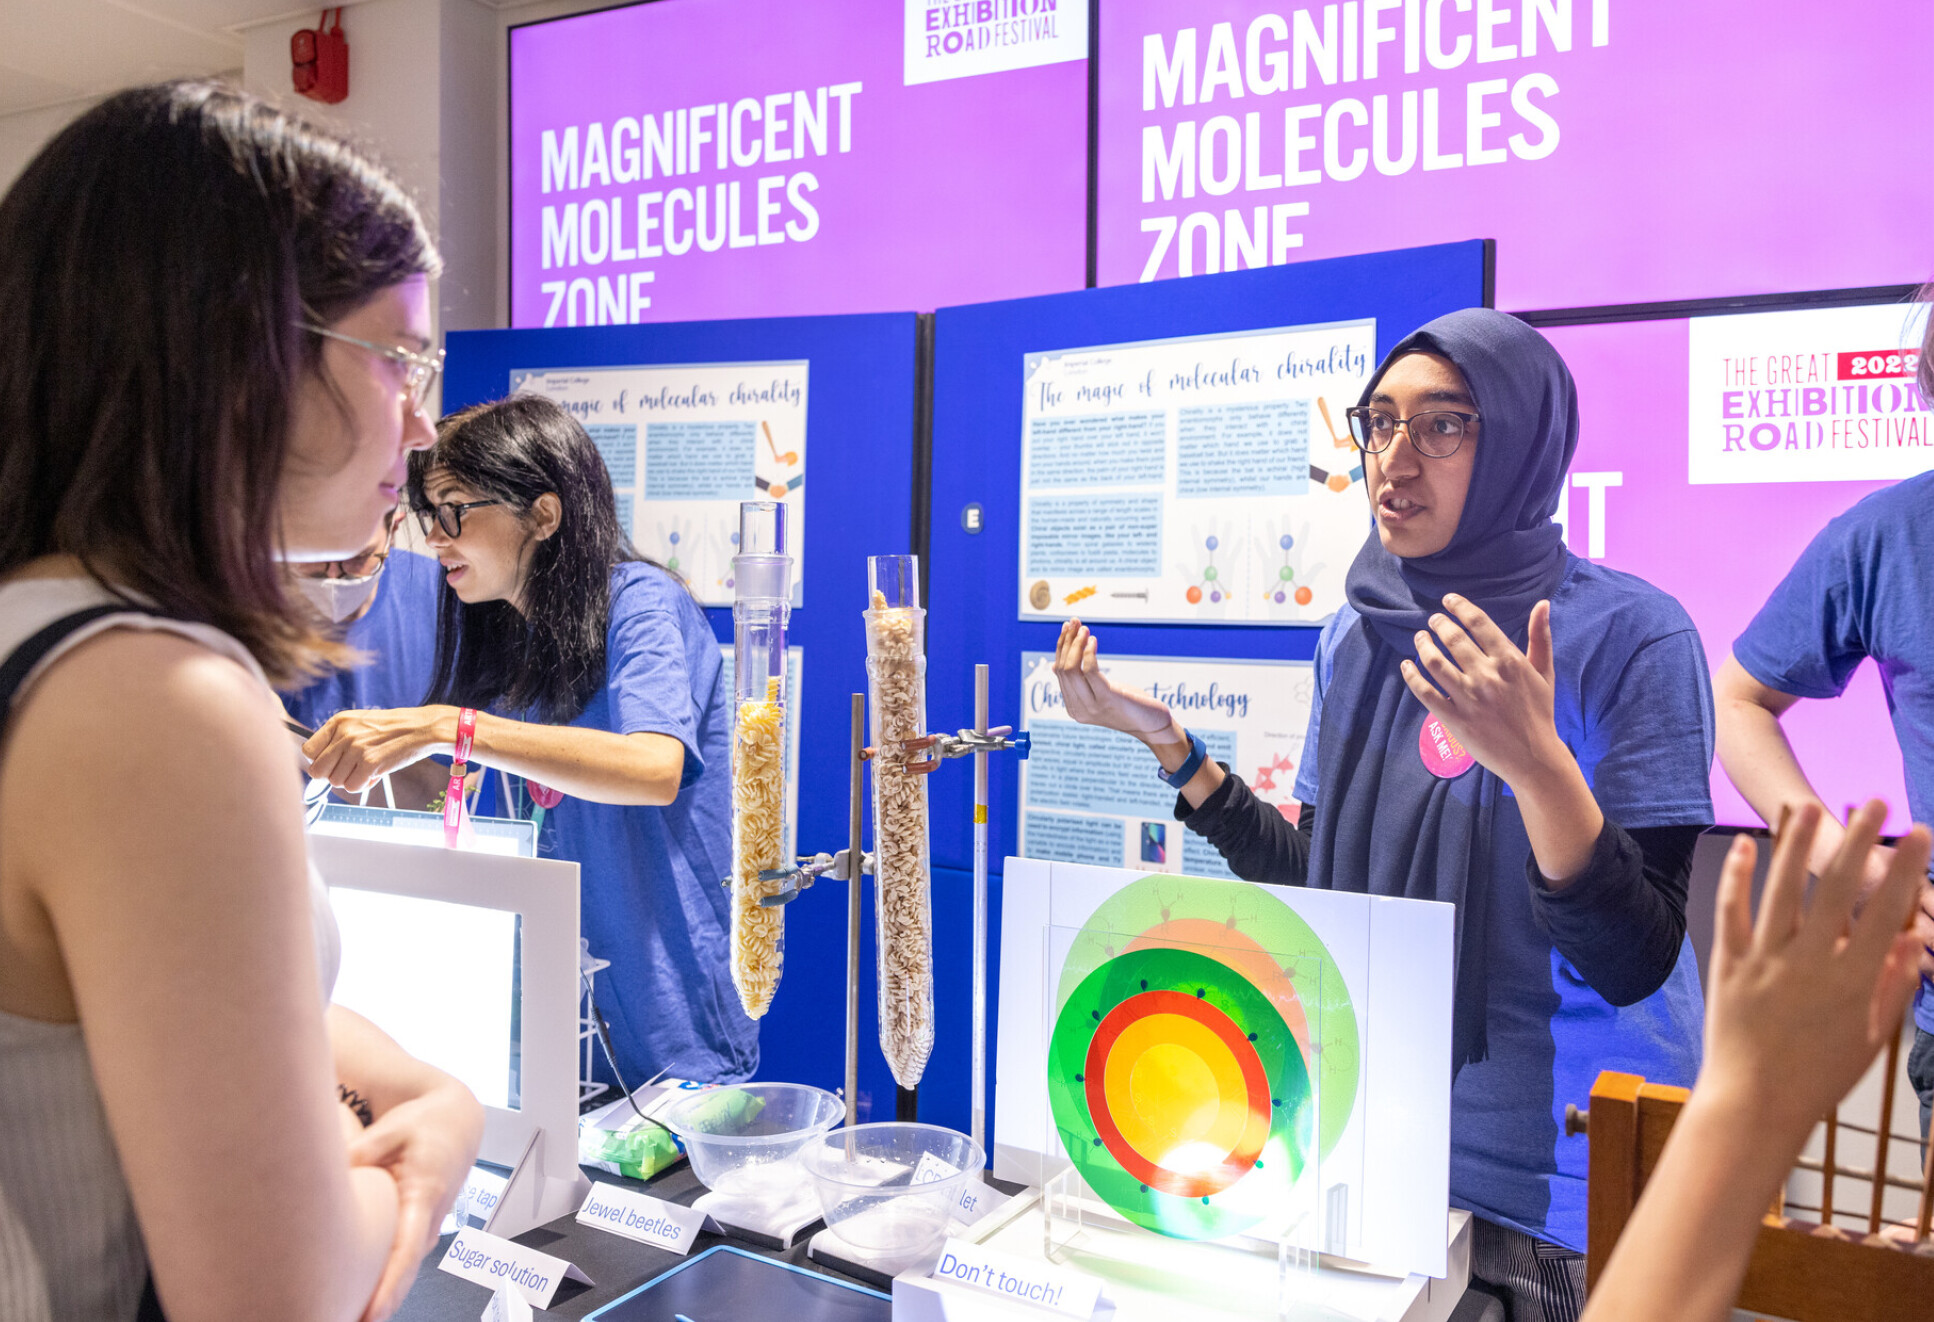 Female researcher talking to member of the public at the Great Exhibition Road Festival